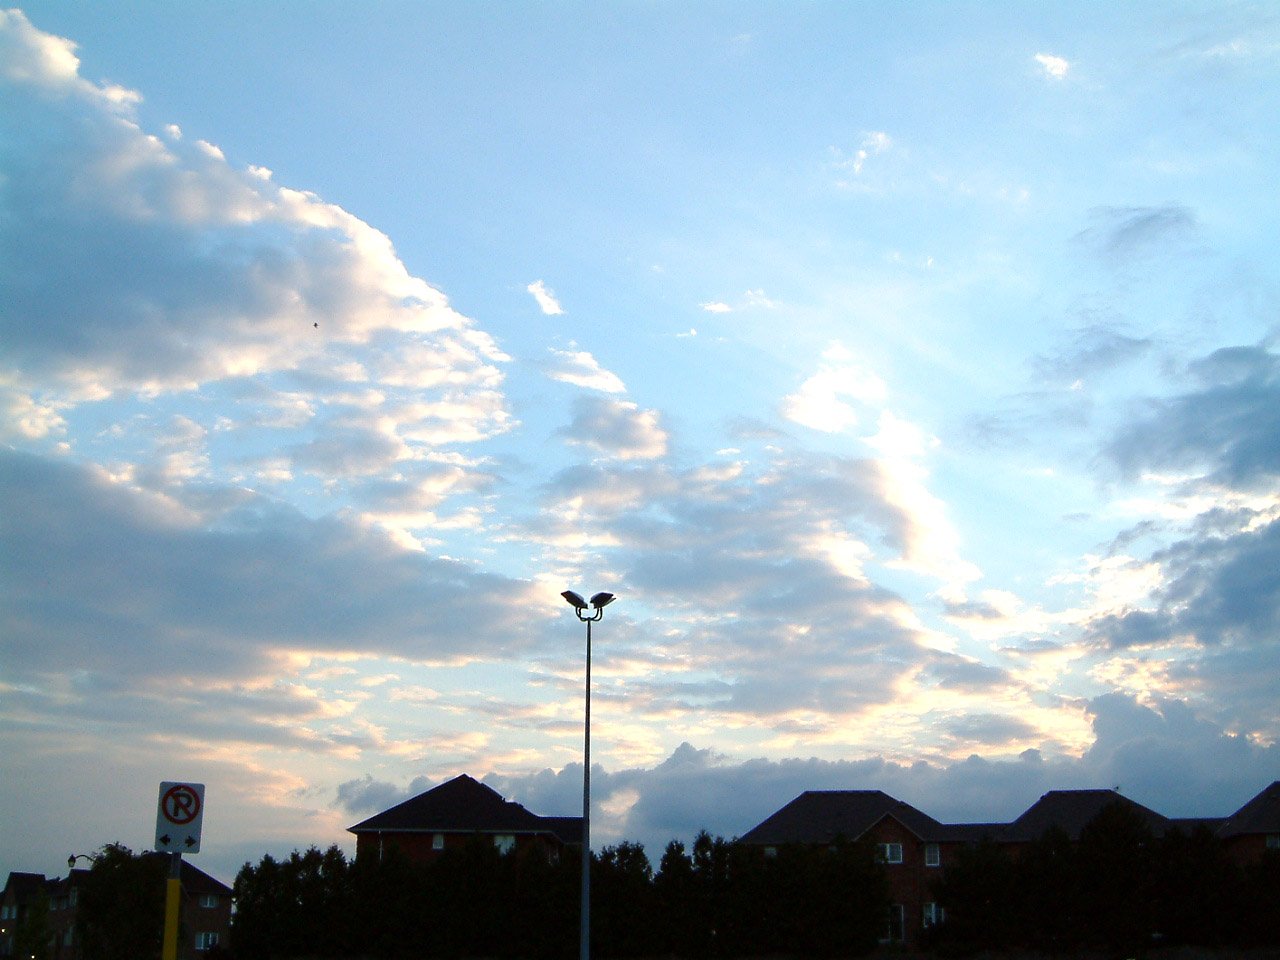 a streetlight against the evening sky by residential homes